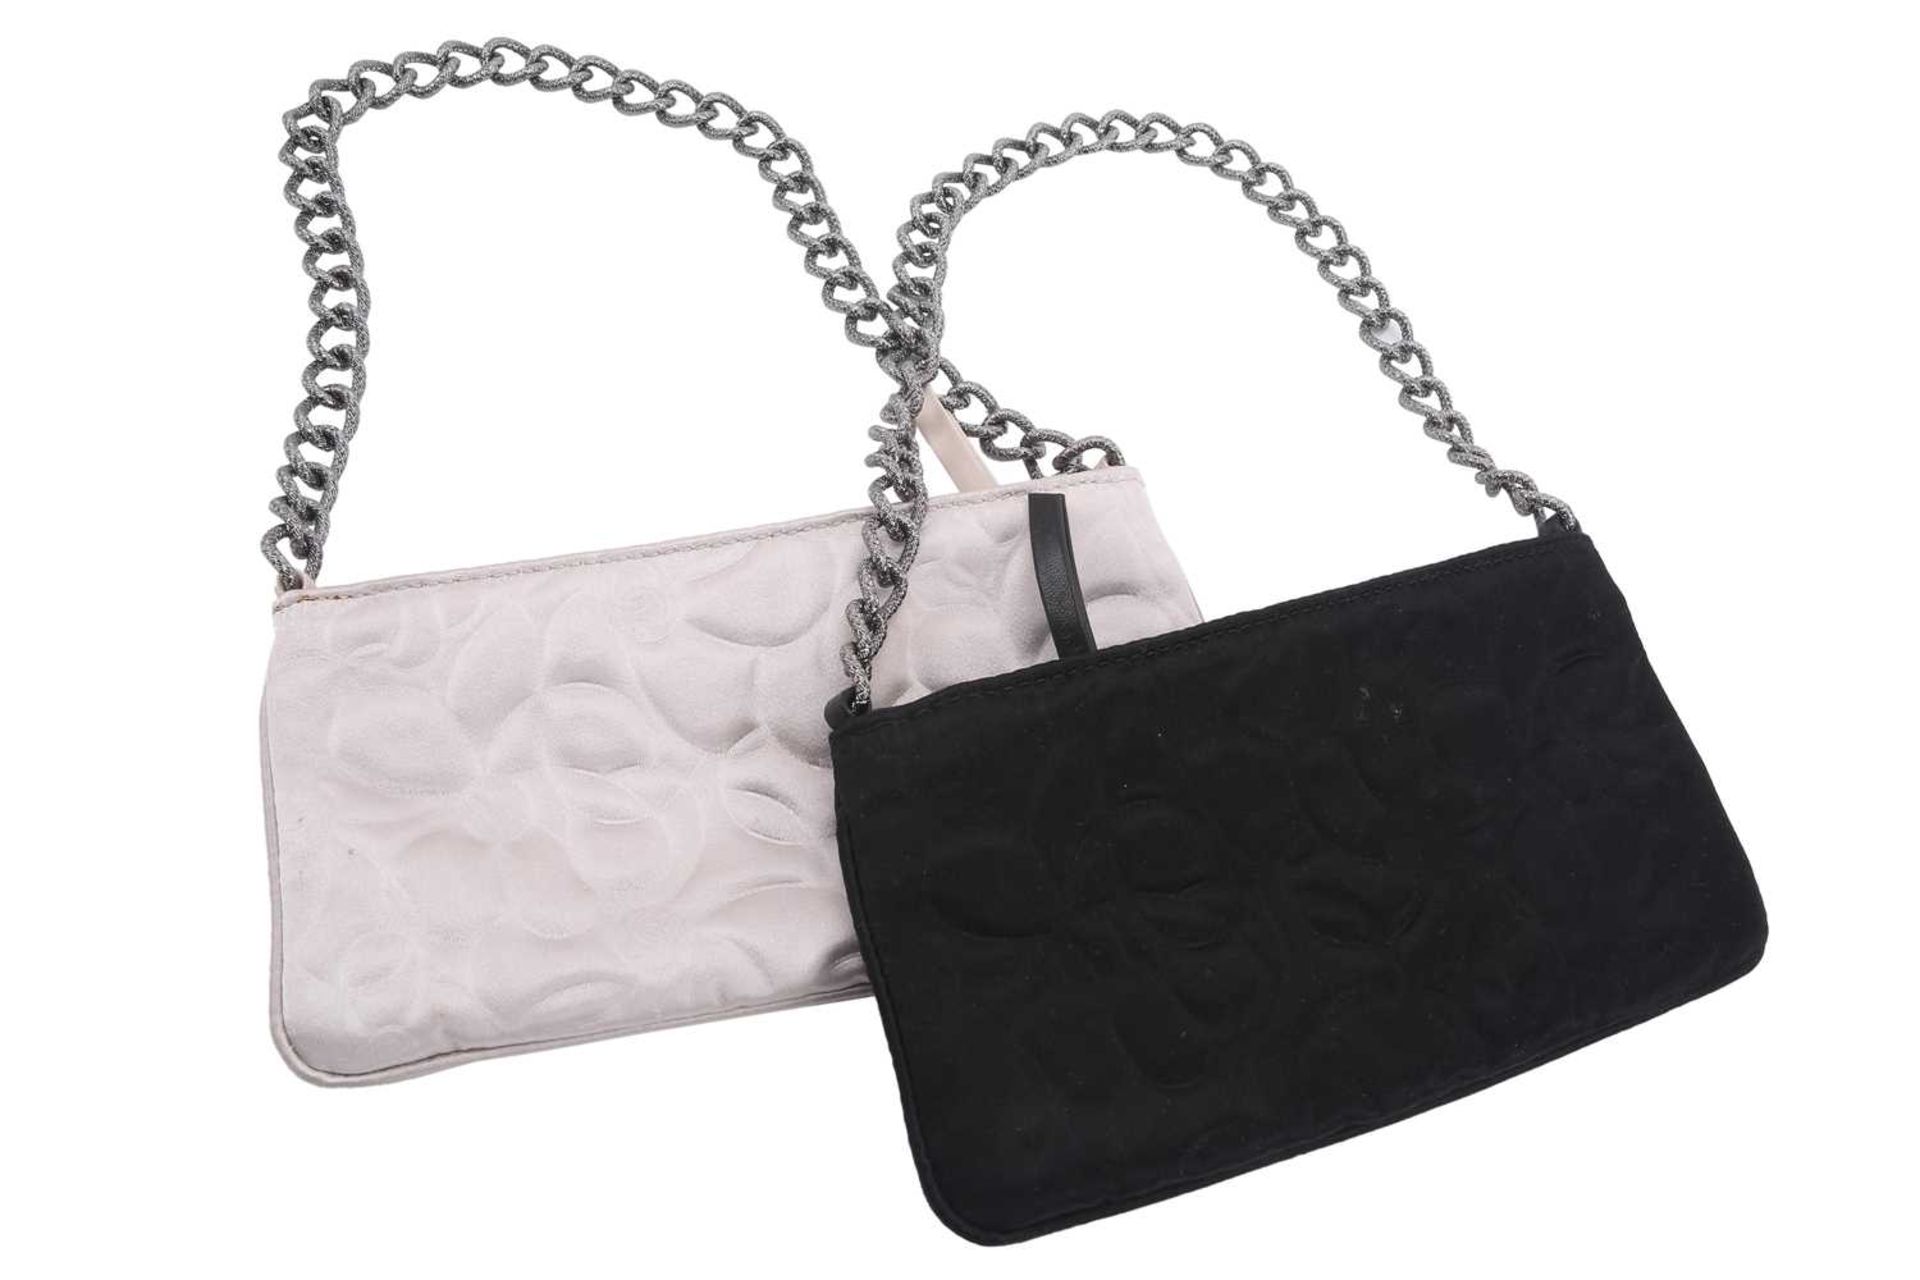 Chanel - two satin Camélia Pochettes; designed by Karl Lagerfeld, both black and white evening